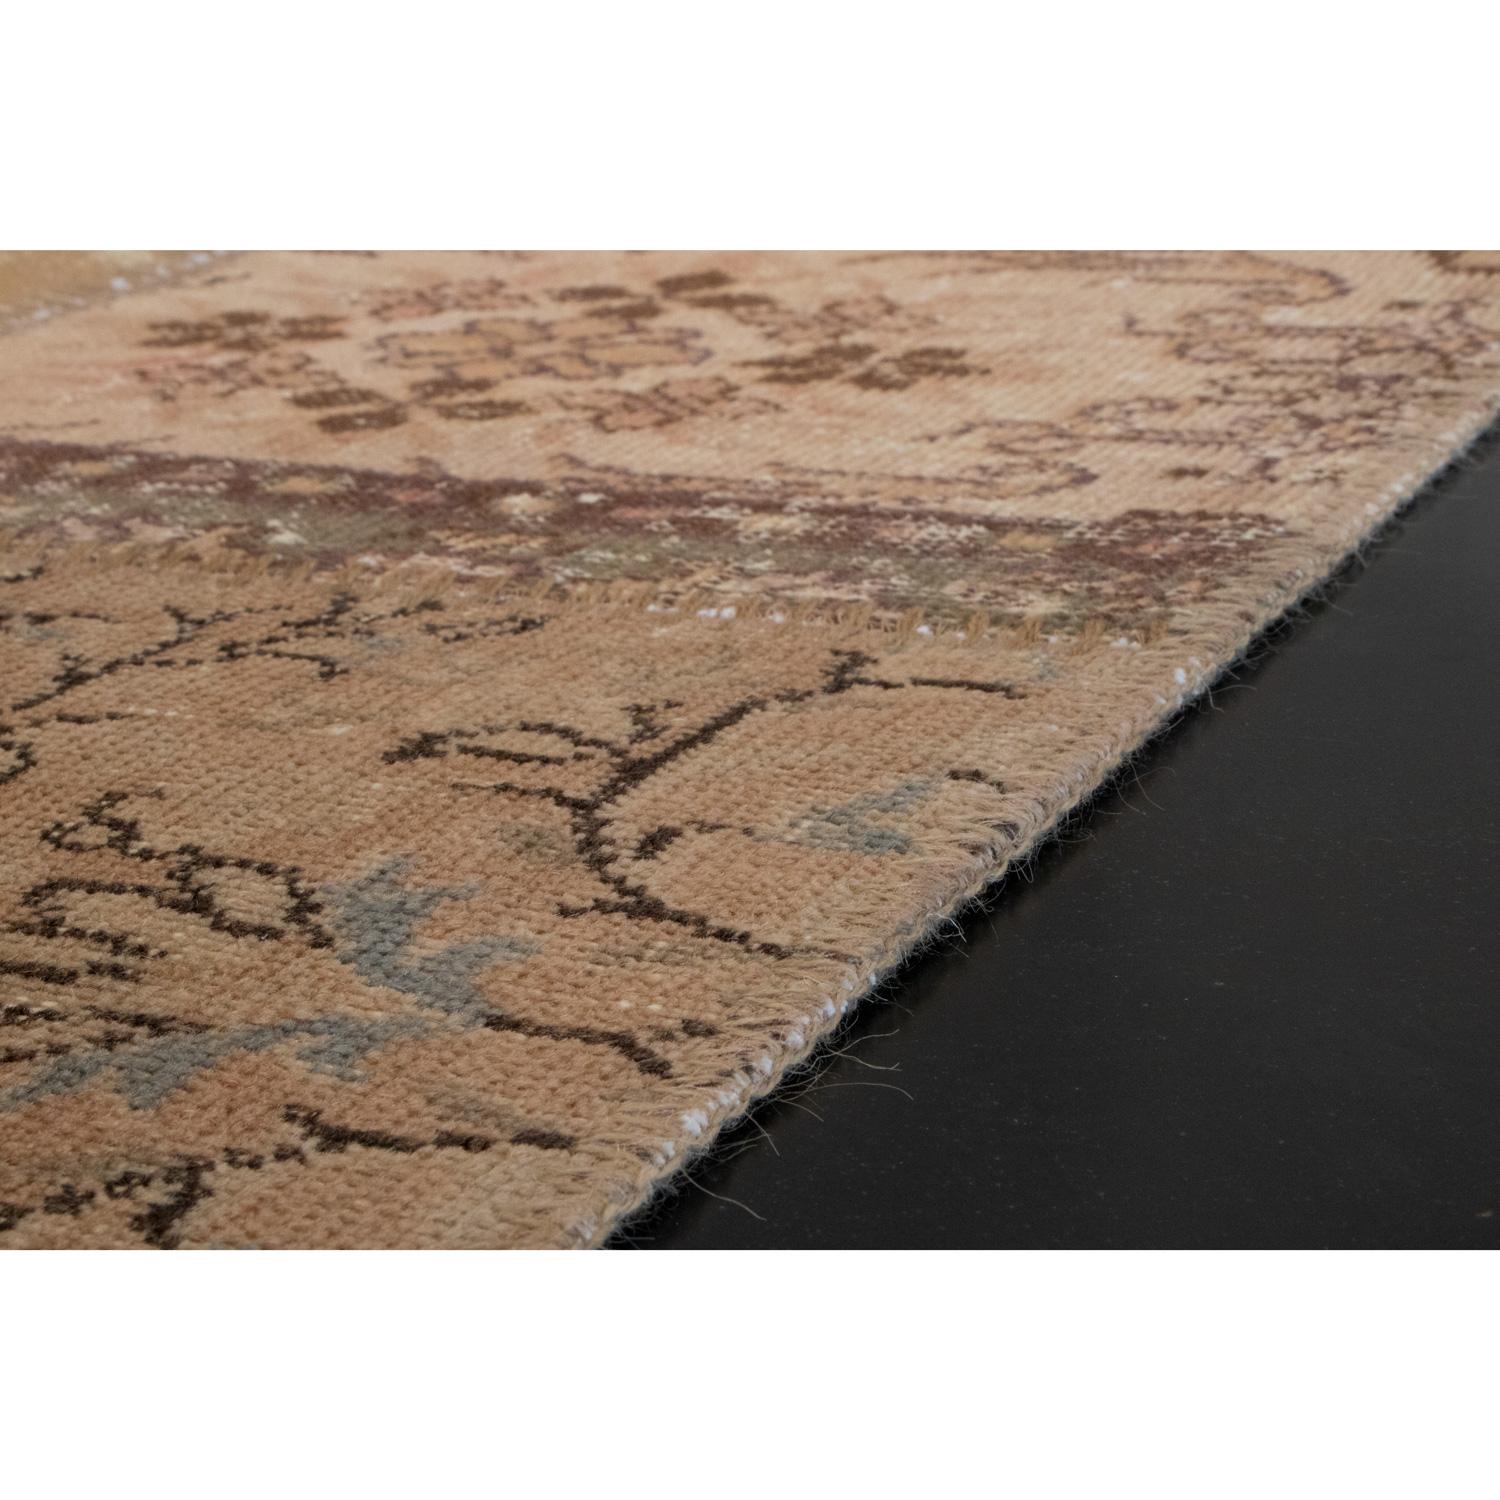 Contemporary Nature Inspired Motifs Wool Cotton Rug by Deanna Comellini 120x120 cm For Sale